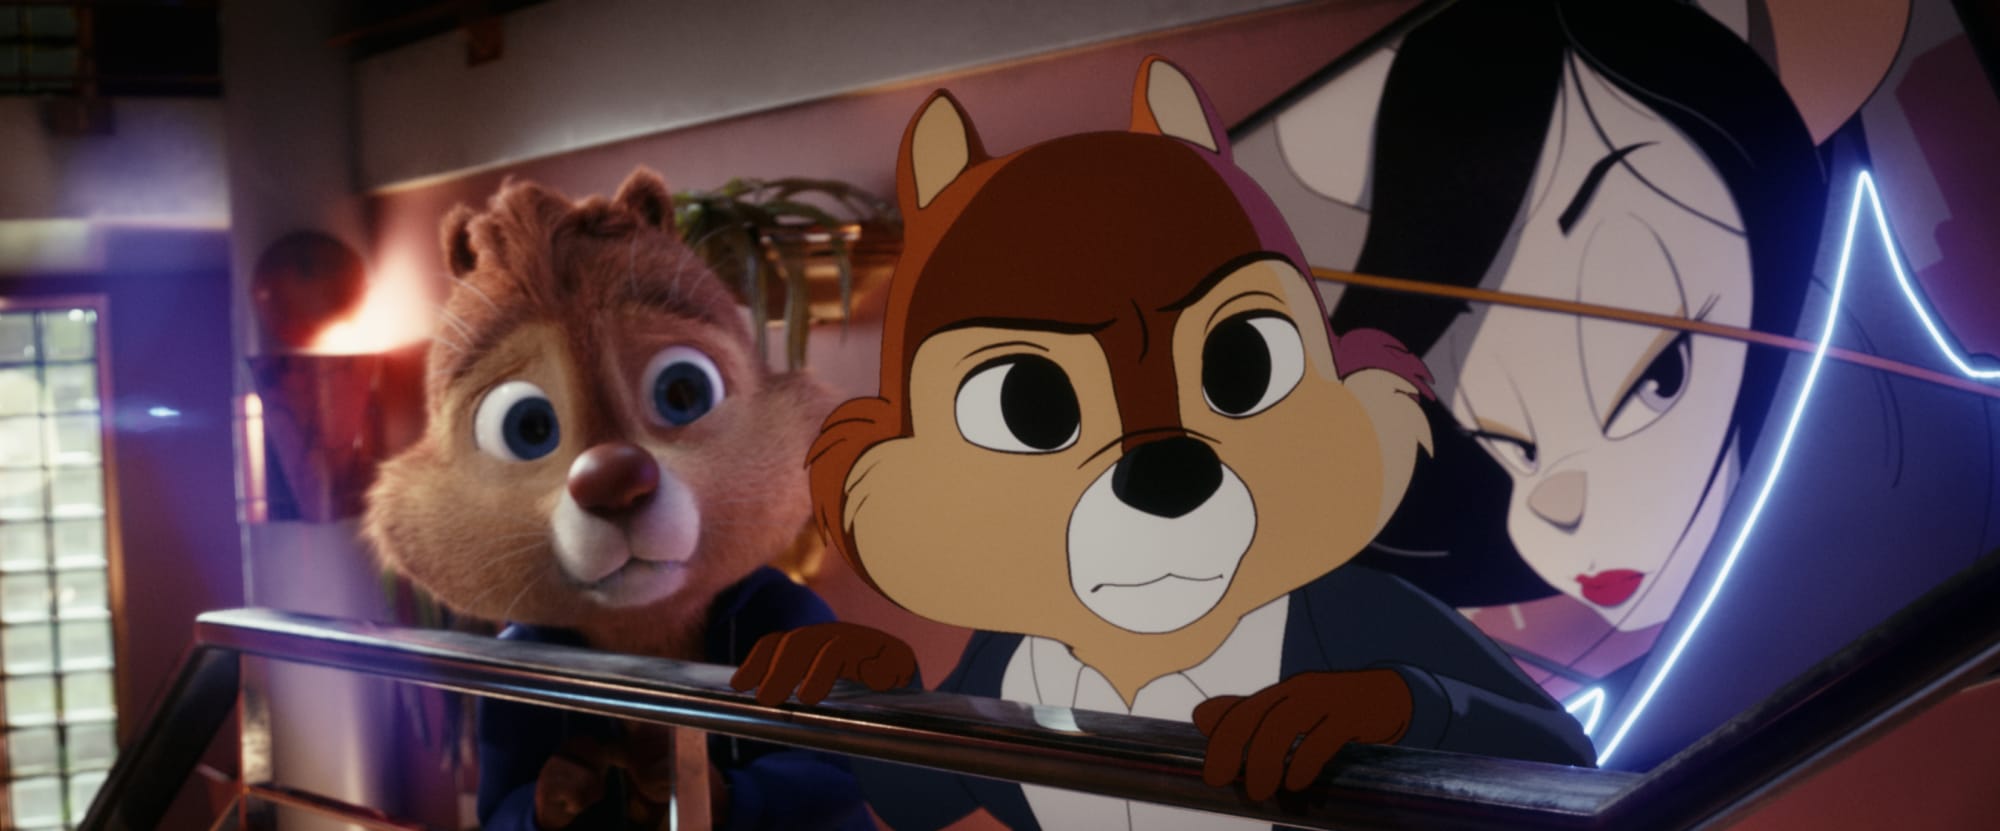 Chip ‘N Dale: Rescue Rangers movie review: The weirdest and most fun movie of the year